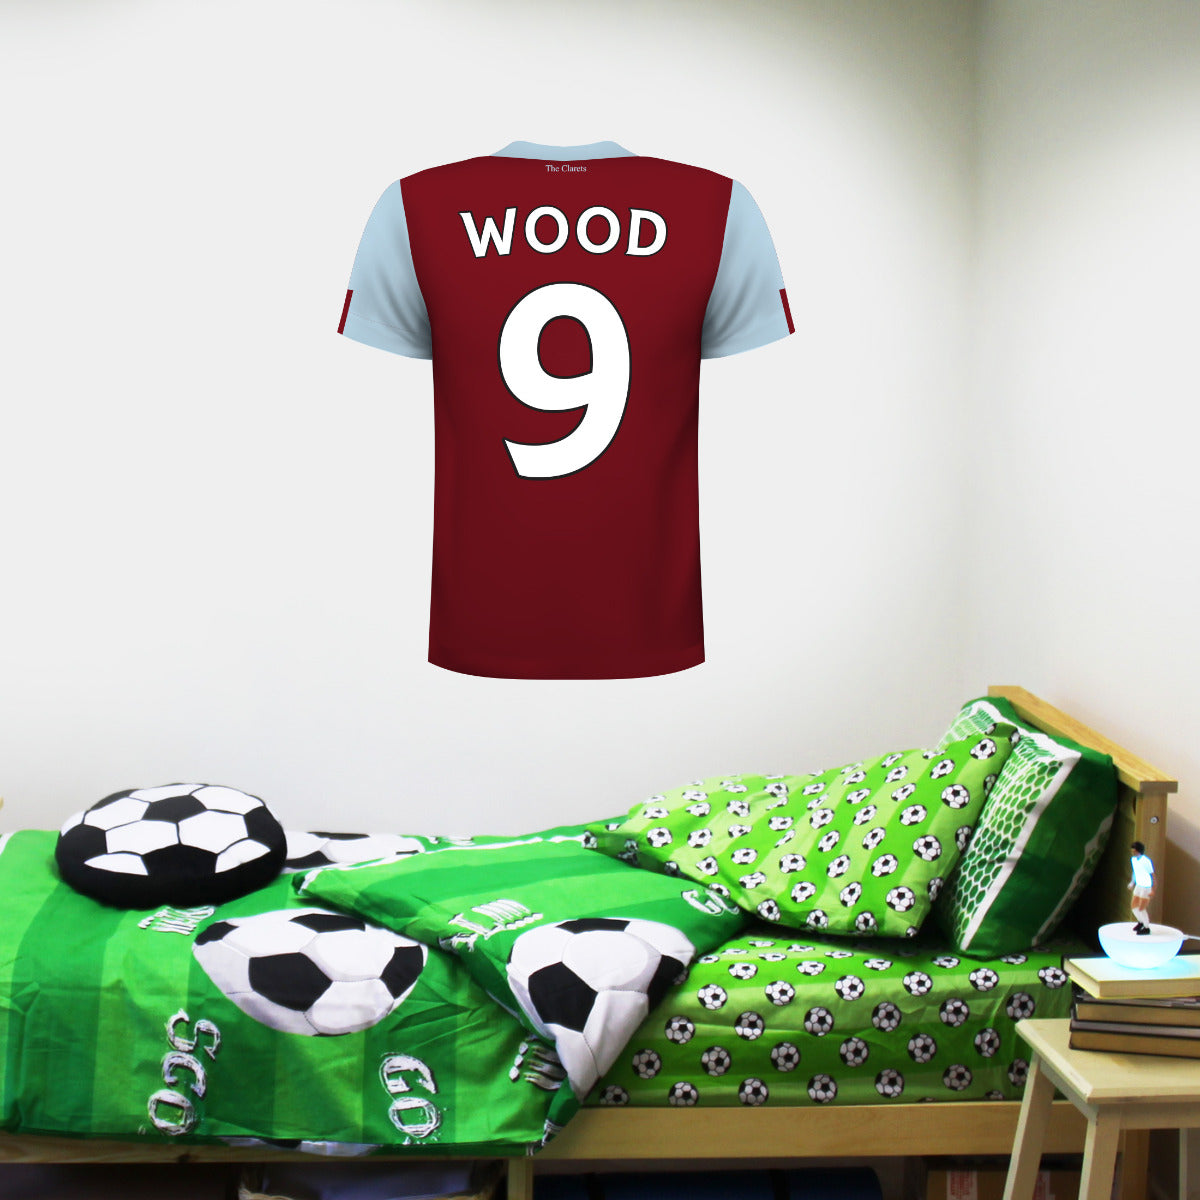 Burnley Football Club - Personalised Name and Number Shirt + Clarets Wall Sticker Set